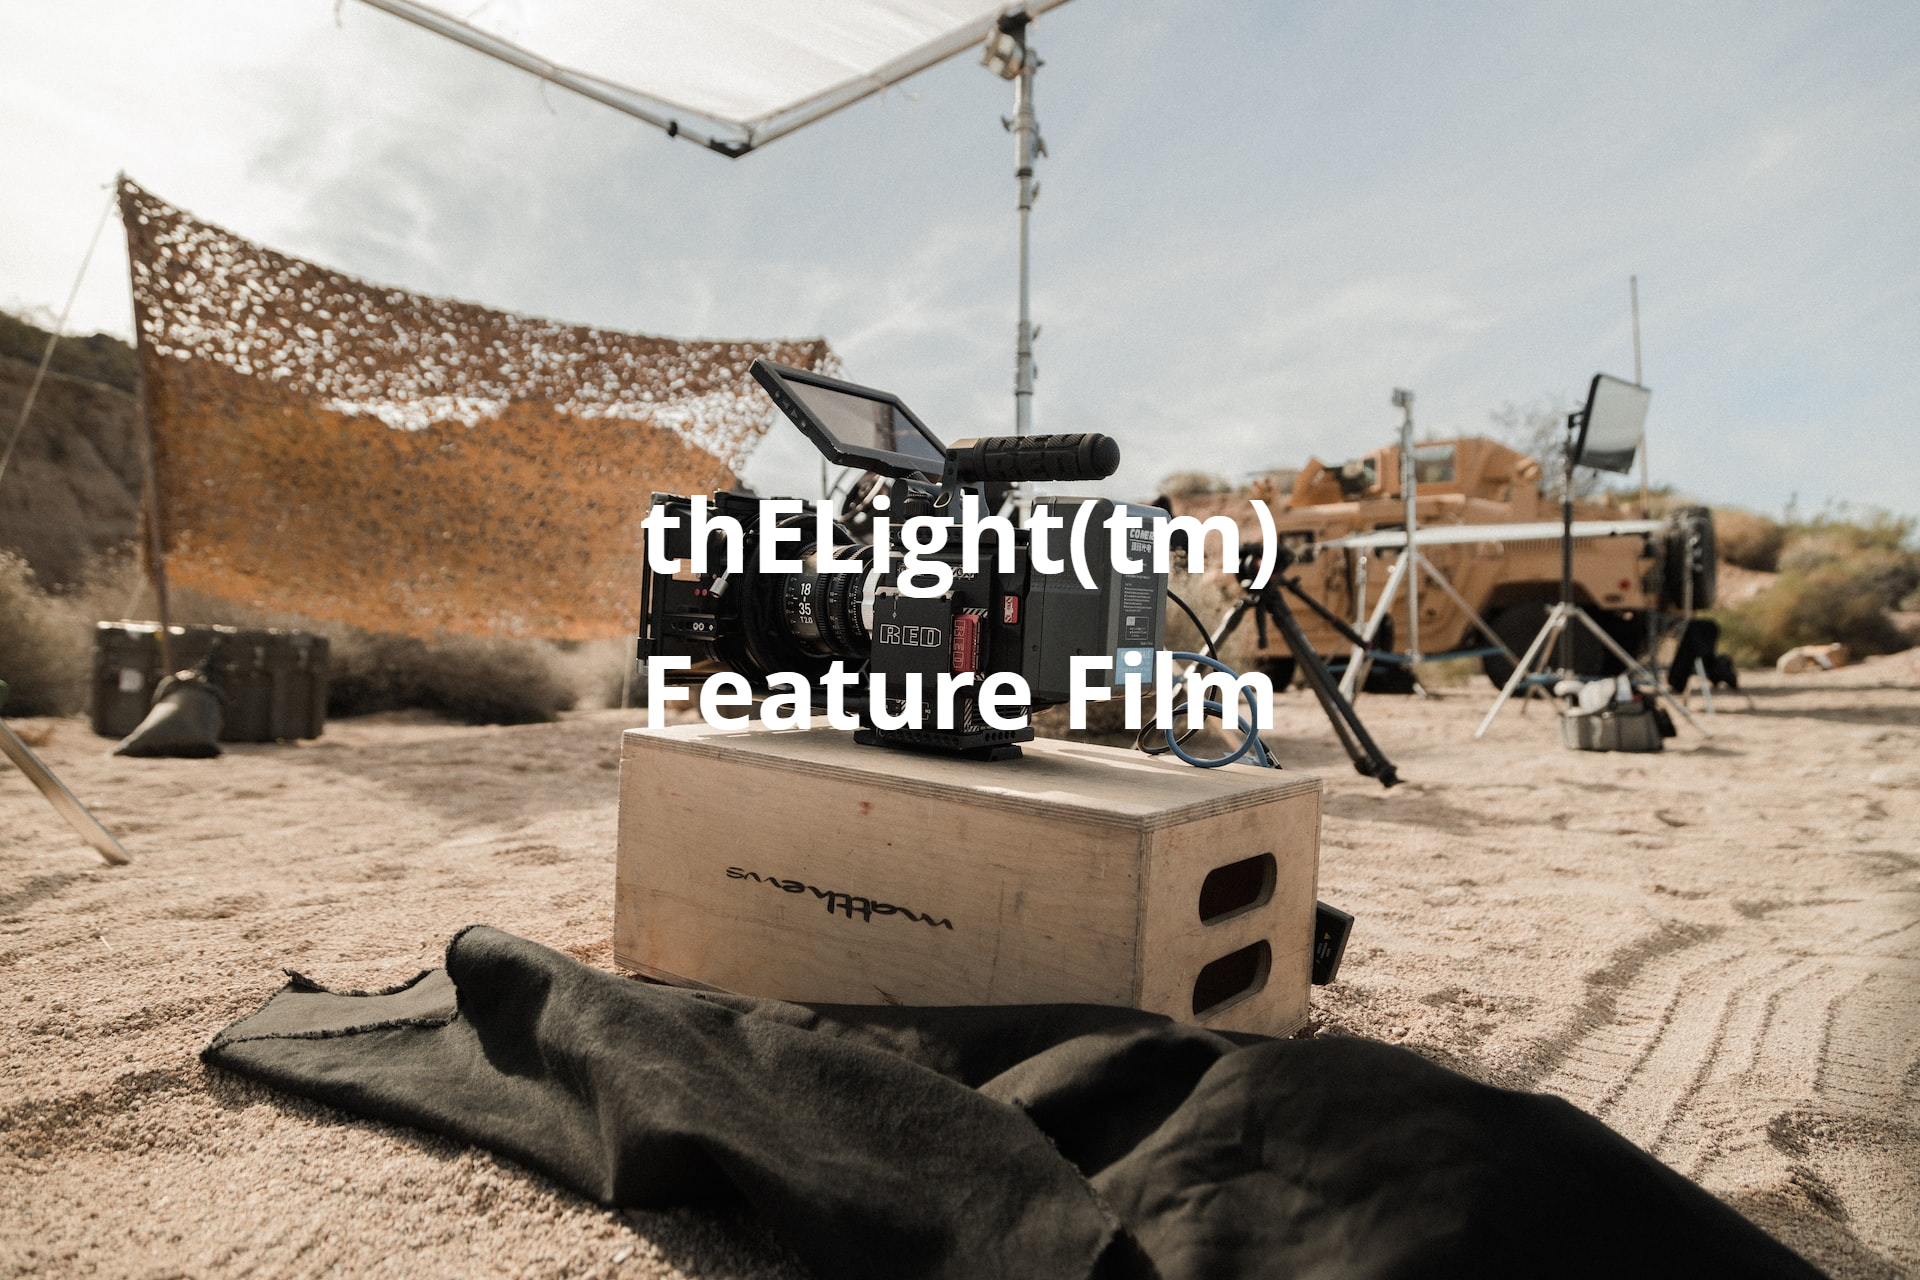 thELight (tm) Feature Film